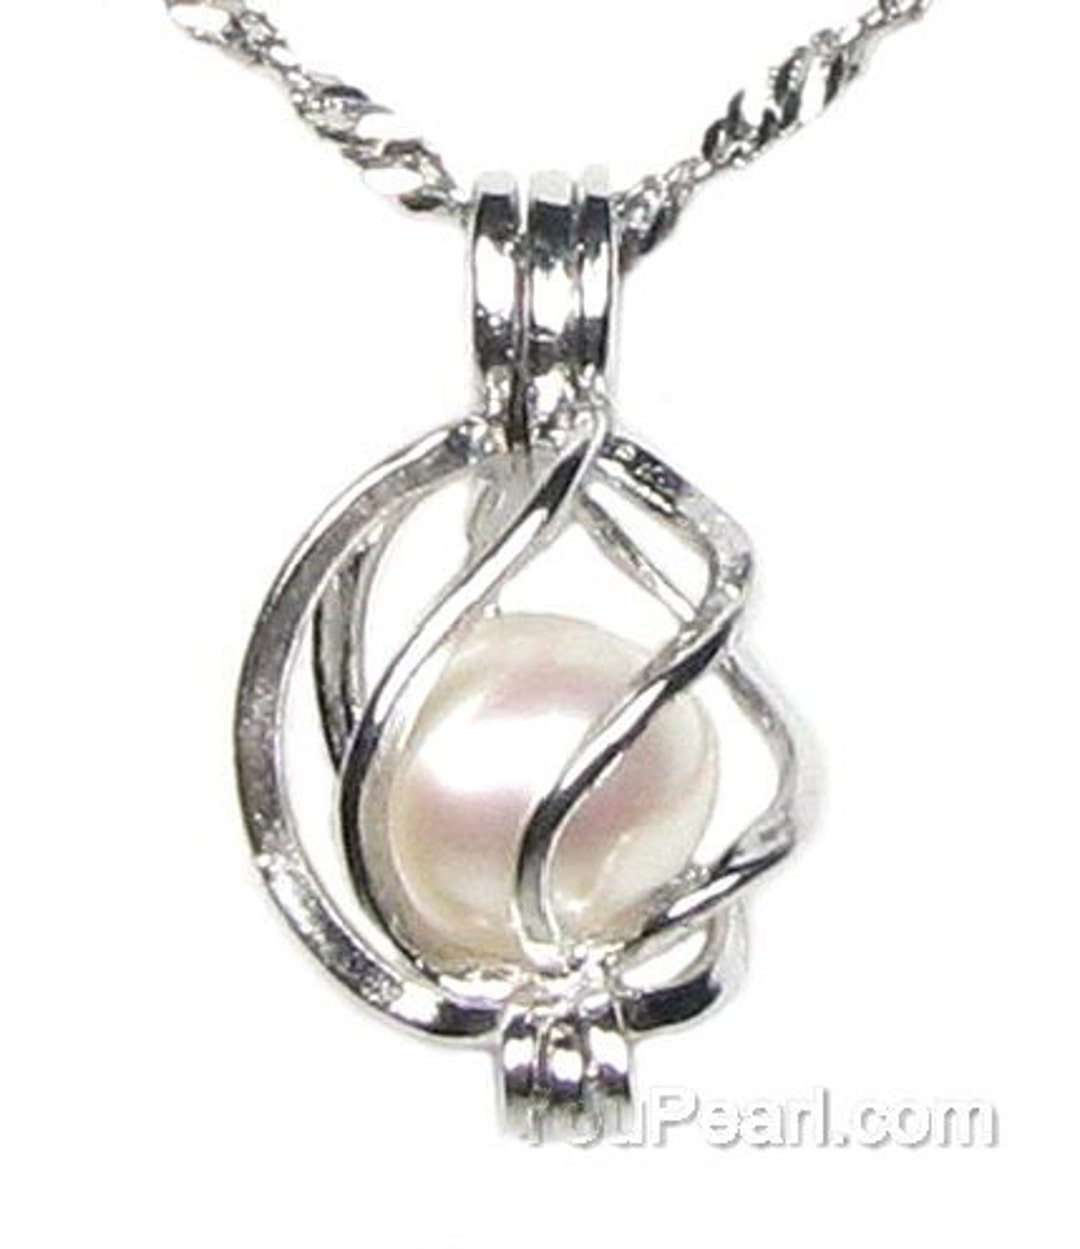 C030120 Sterling Silver Freshwater Pearl Cage Pendant Necklace Jewelry  Locket For Pearl Party - Buy C030120 Sterling Silver Freshwater Pearl Cage  Pendant Necklace Jewelry Locket For Pearl Party Product on